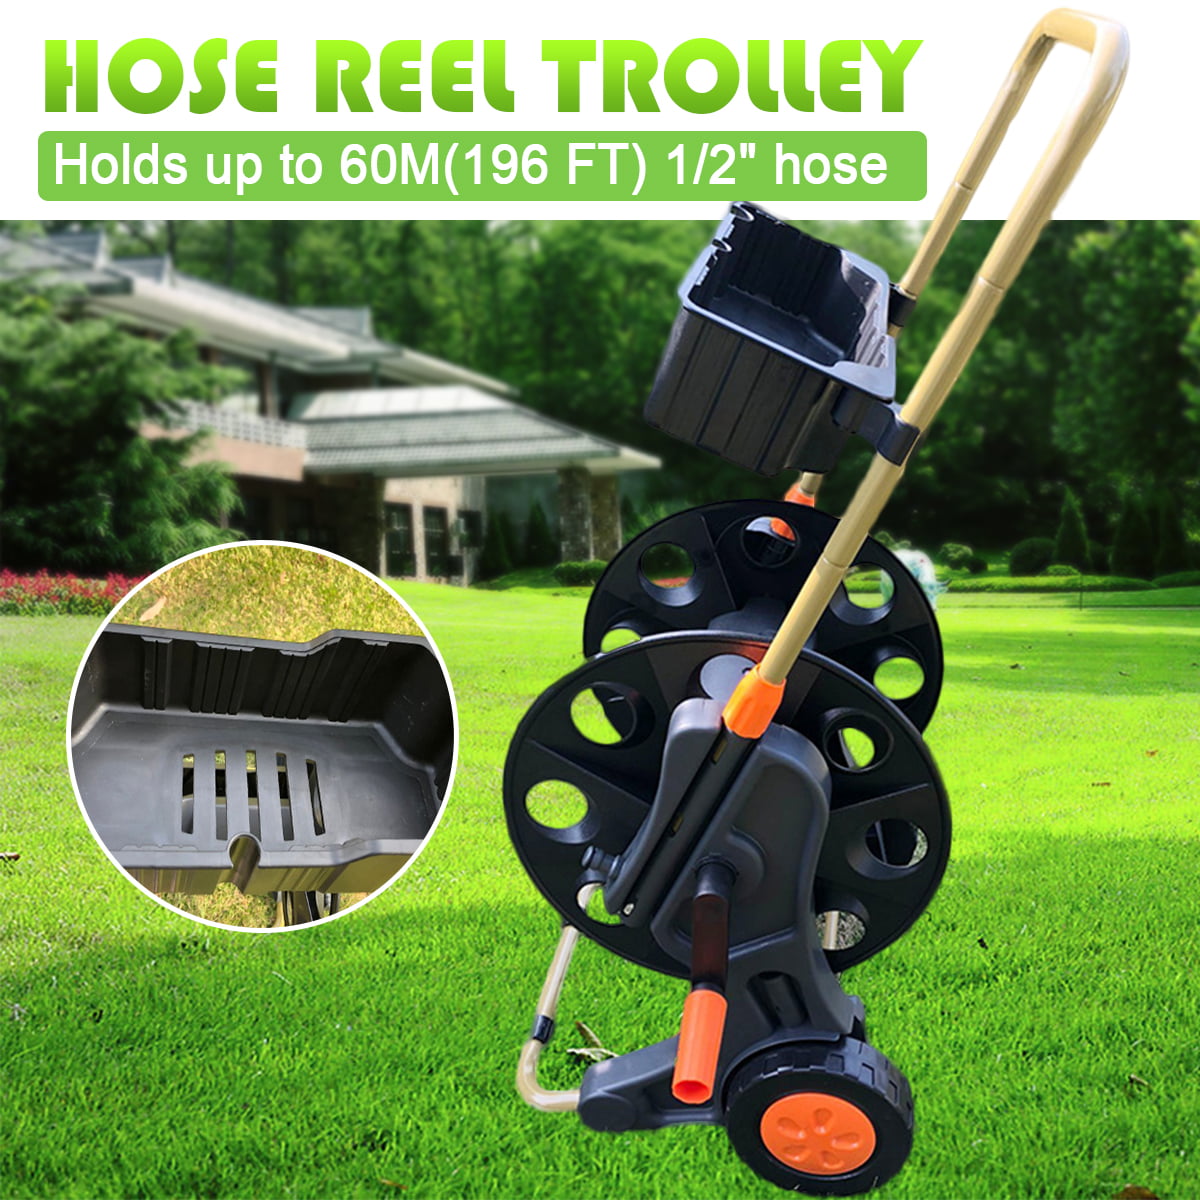 PORTABLE 60M GARDEN HOSE REEL TROLLEY WATER PIPE FREE STANDING WALL MOUNTABLE 